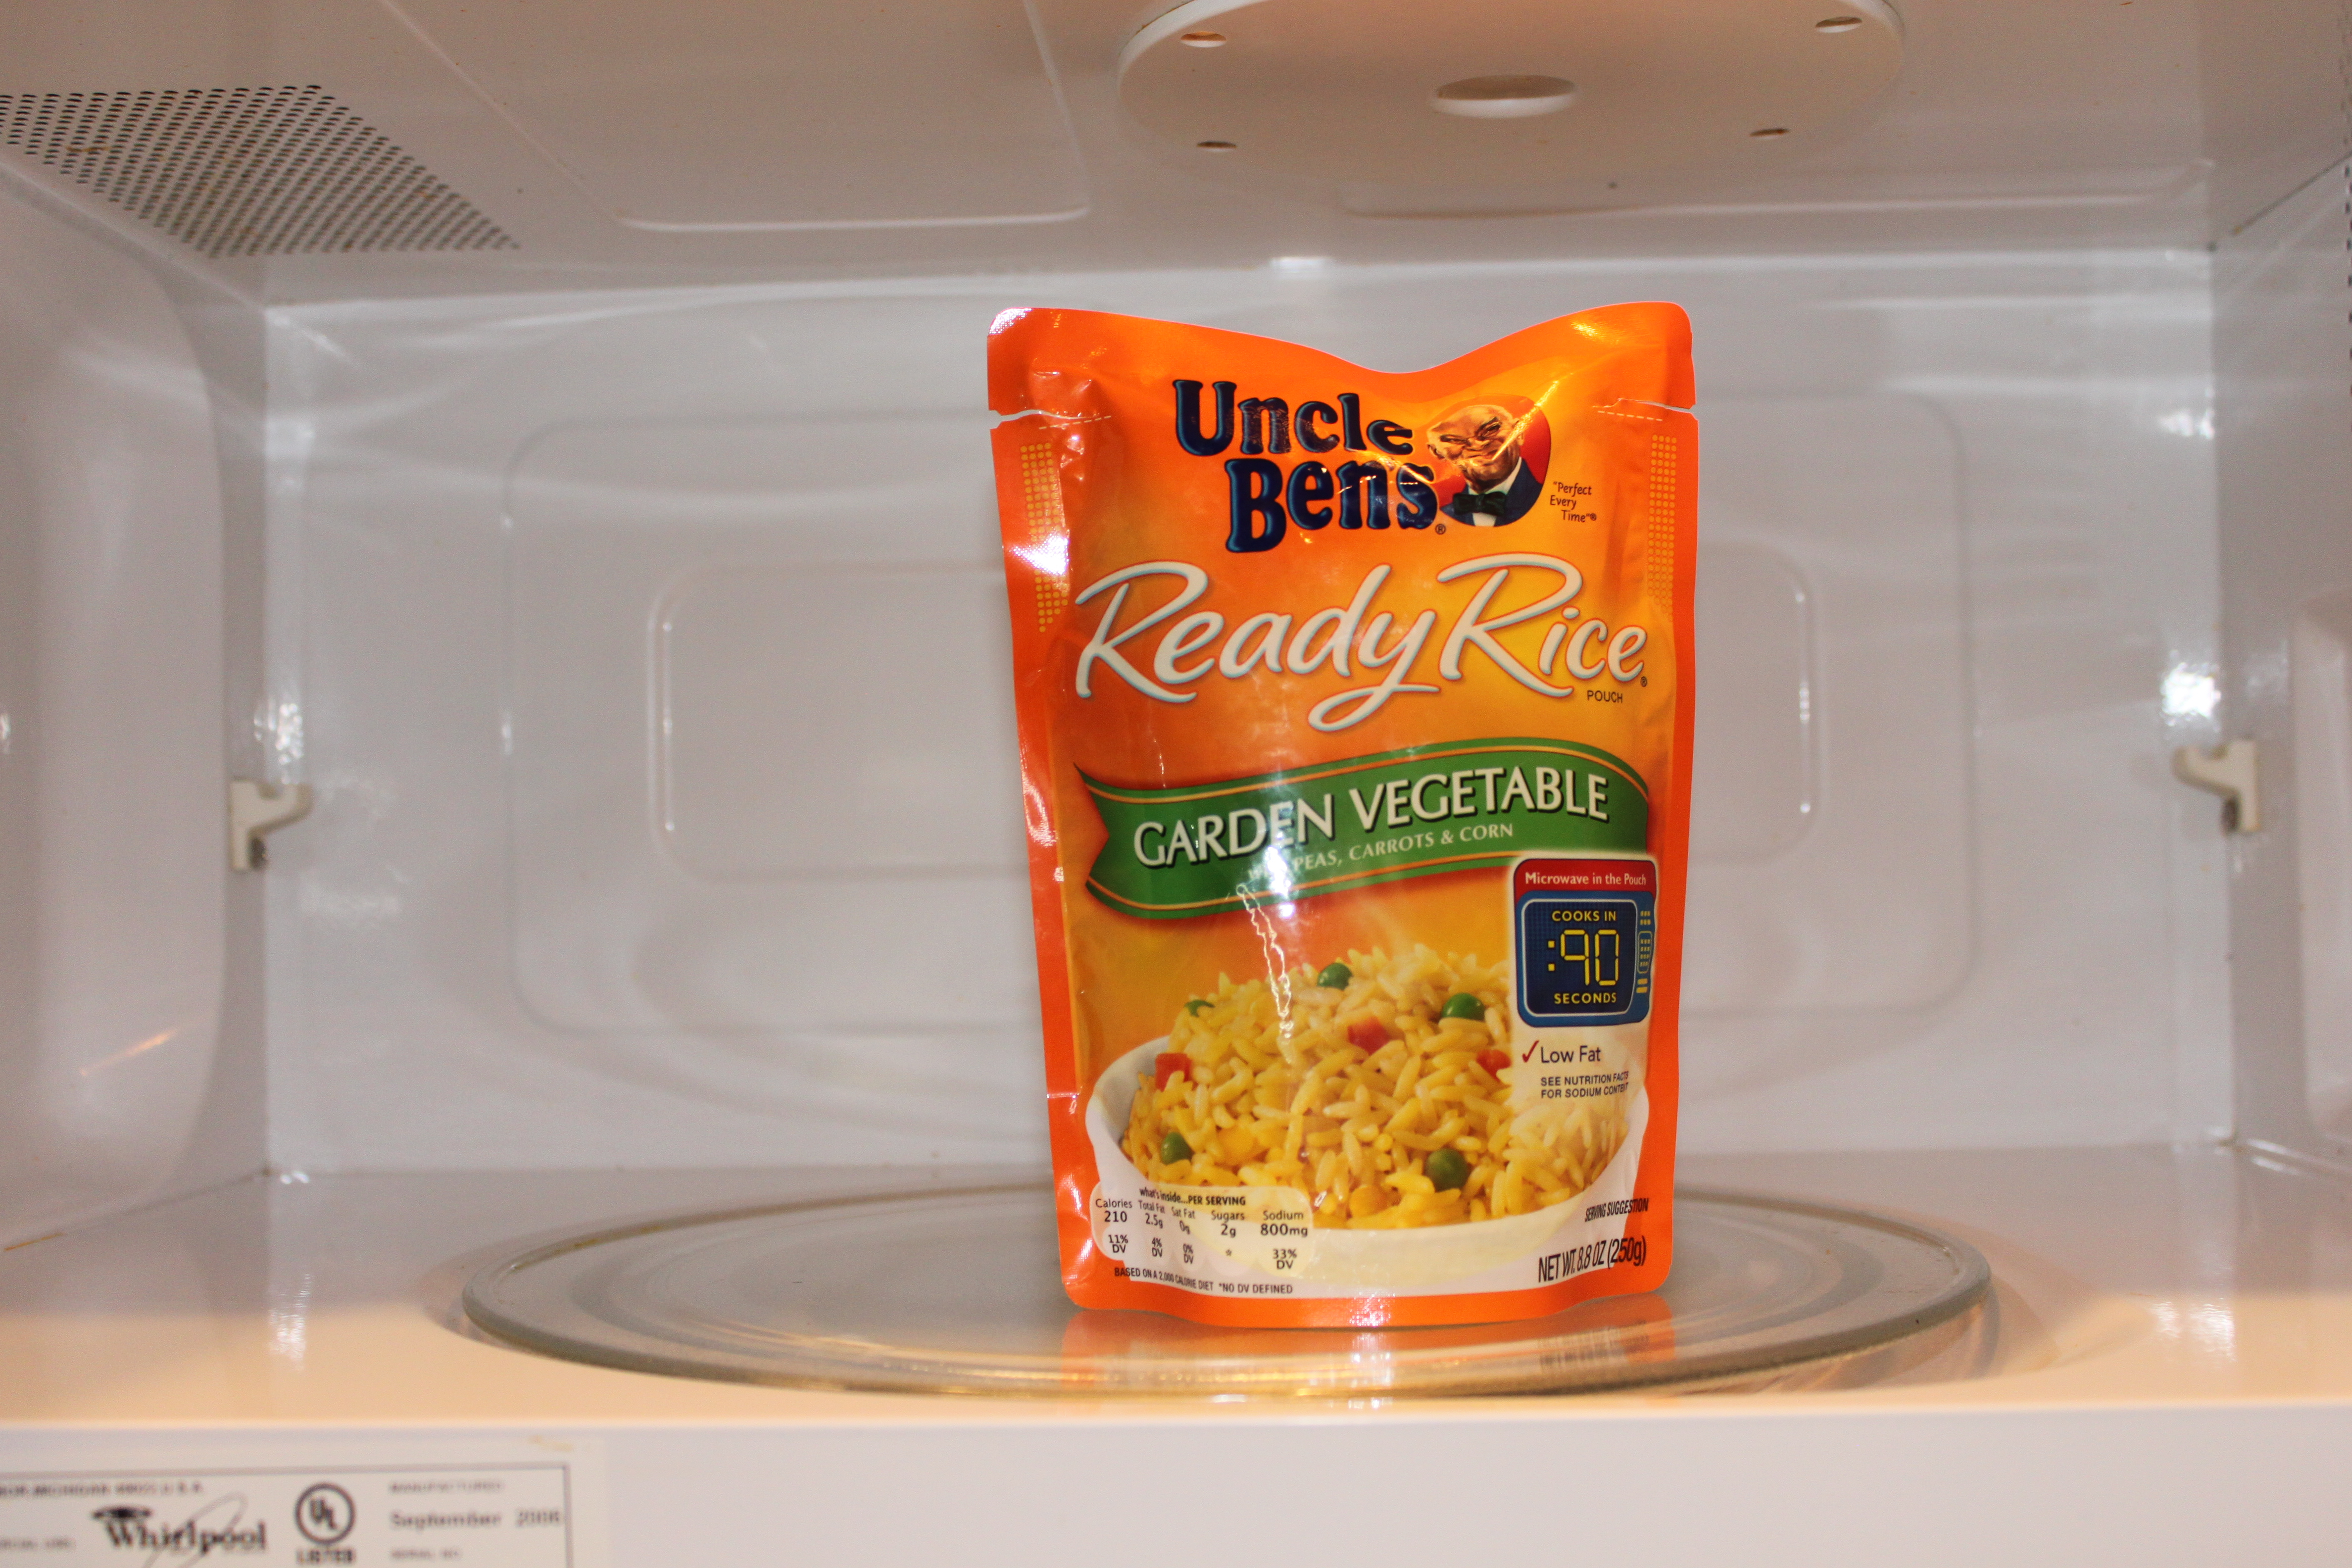 easy recipes using uncle bens with chickpeas, asparagus, and rice. Kid friendly meal, easy, week day, under 20 minutes